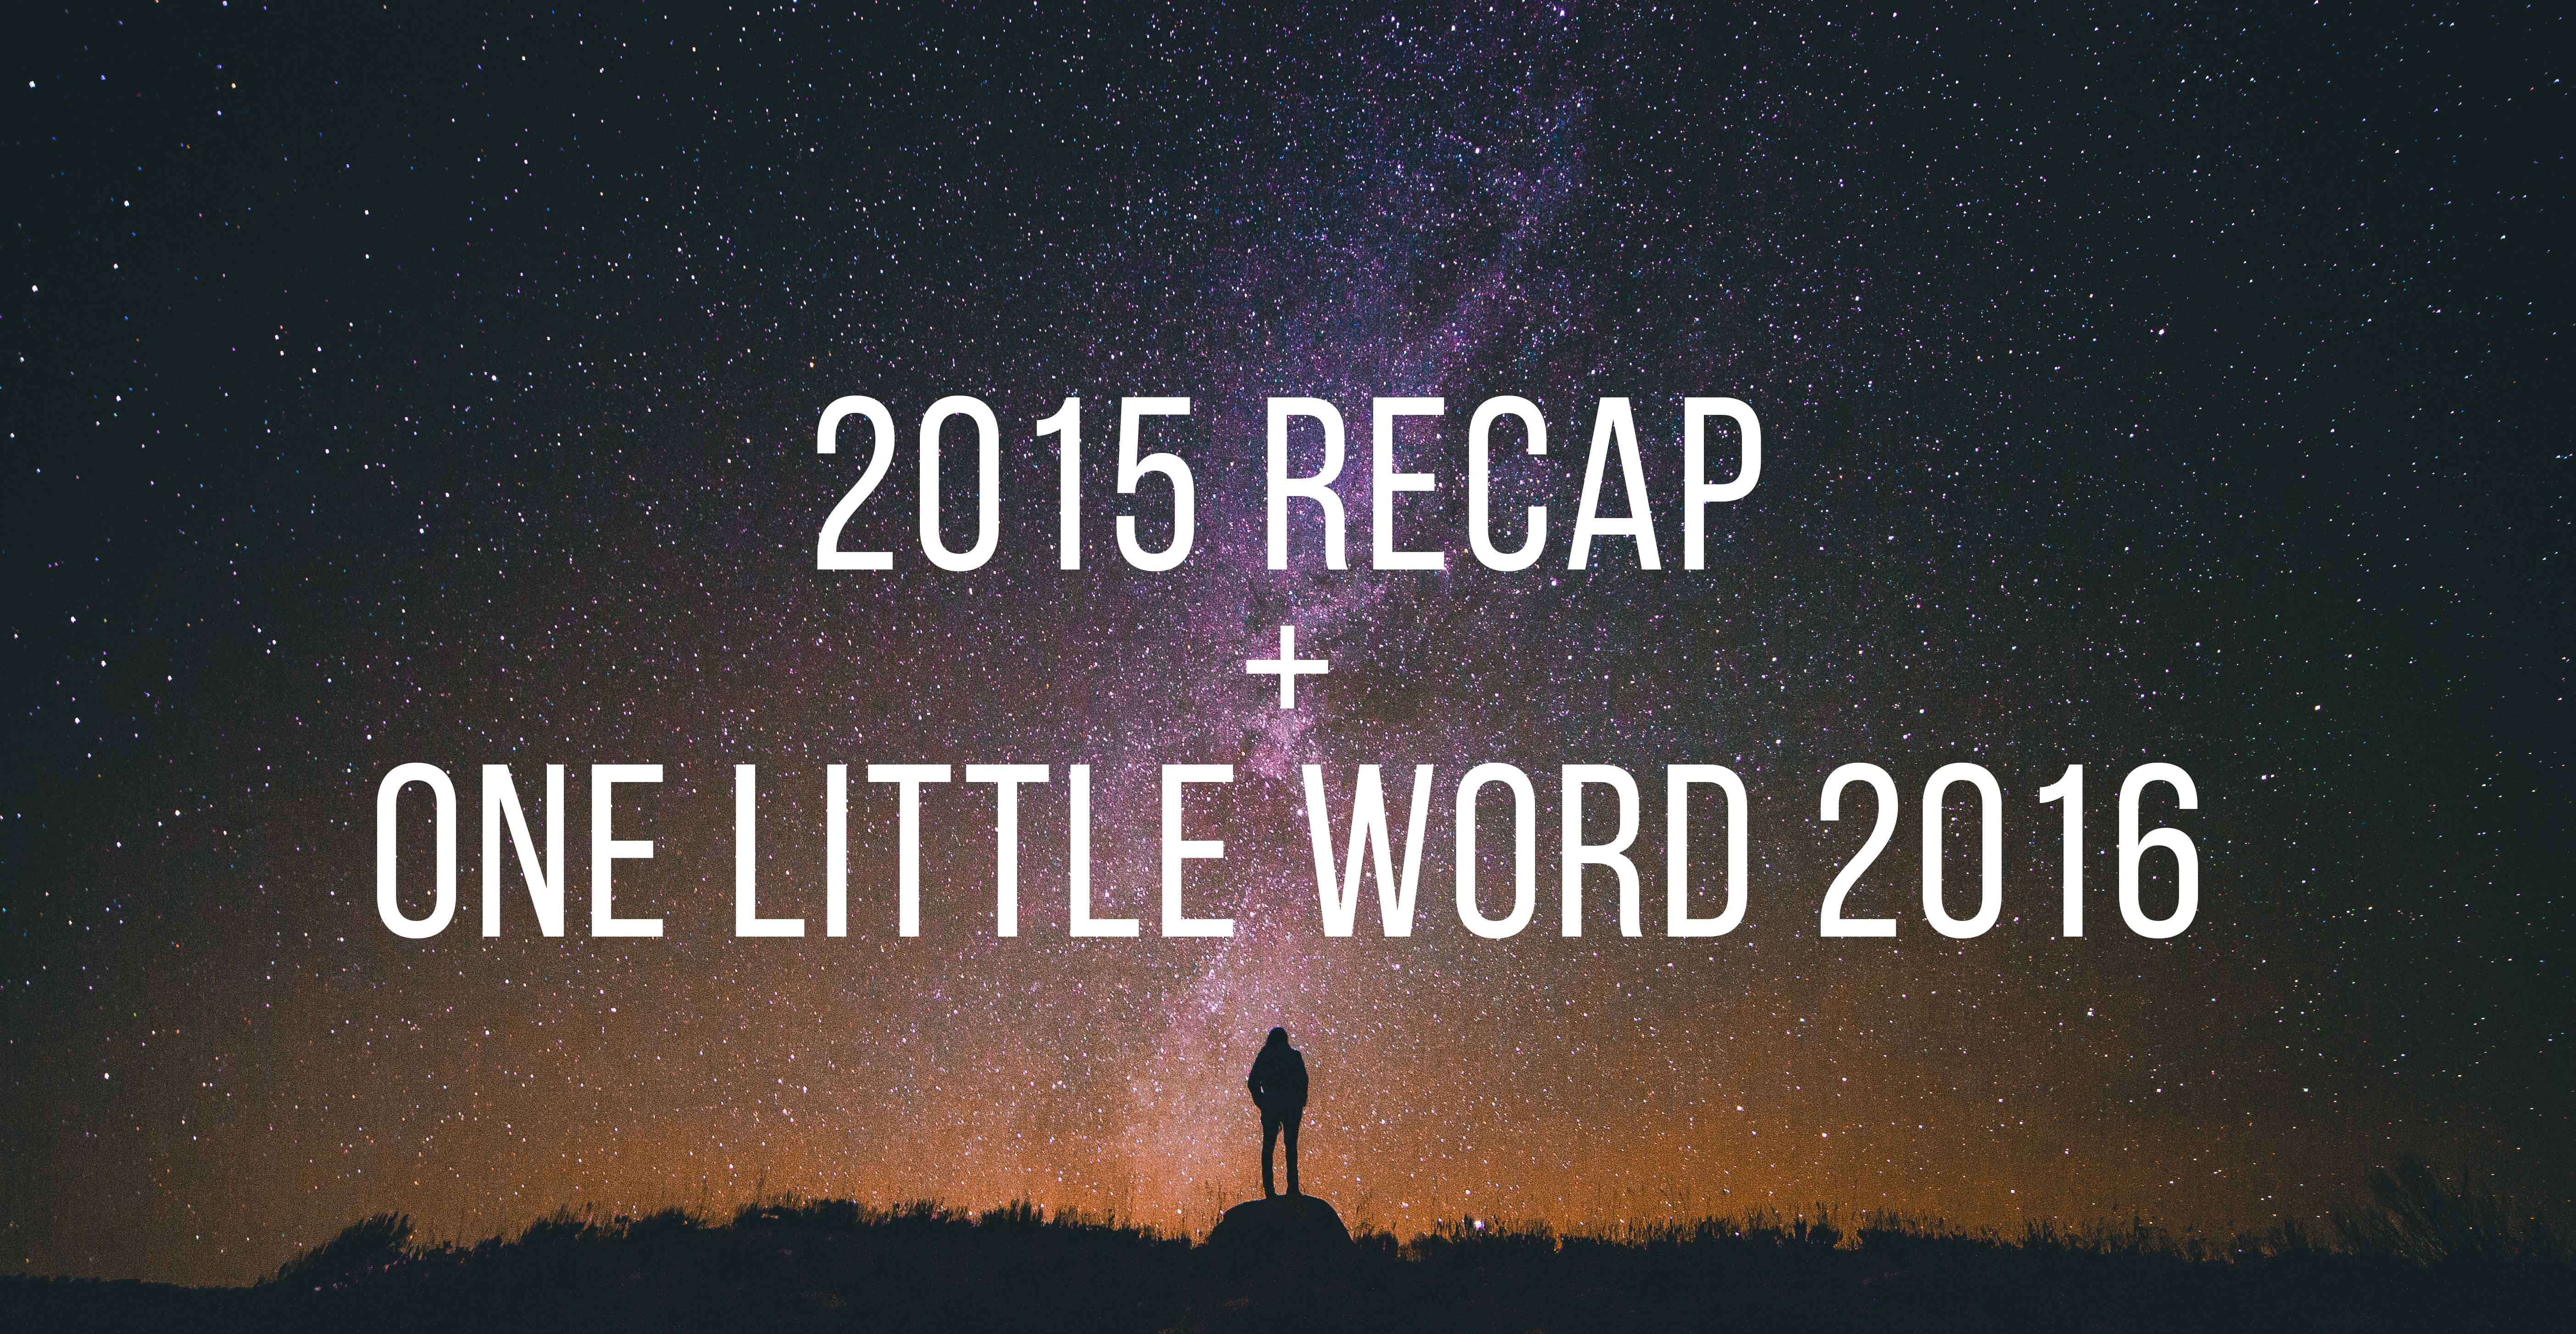 2015 recap and one little word 2016